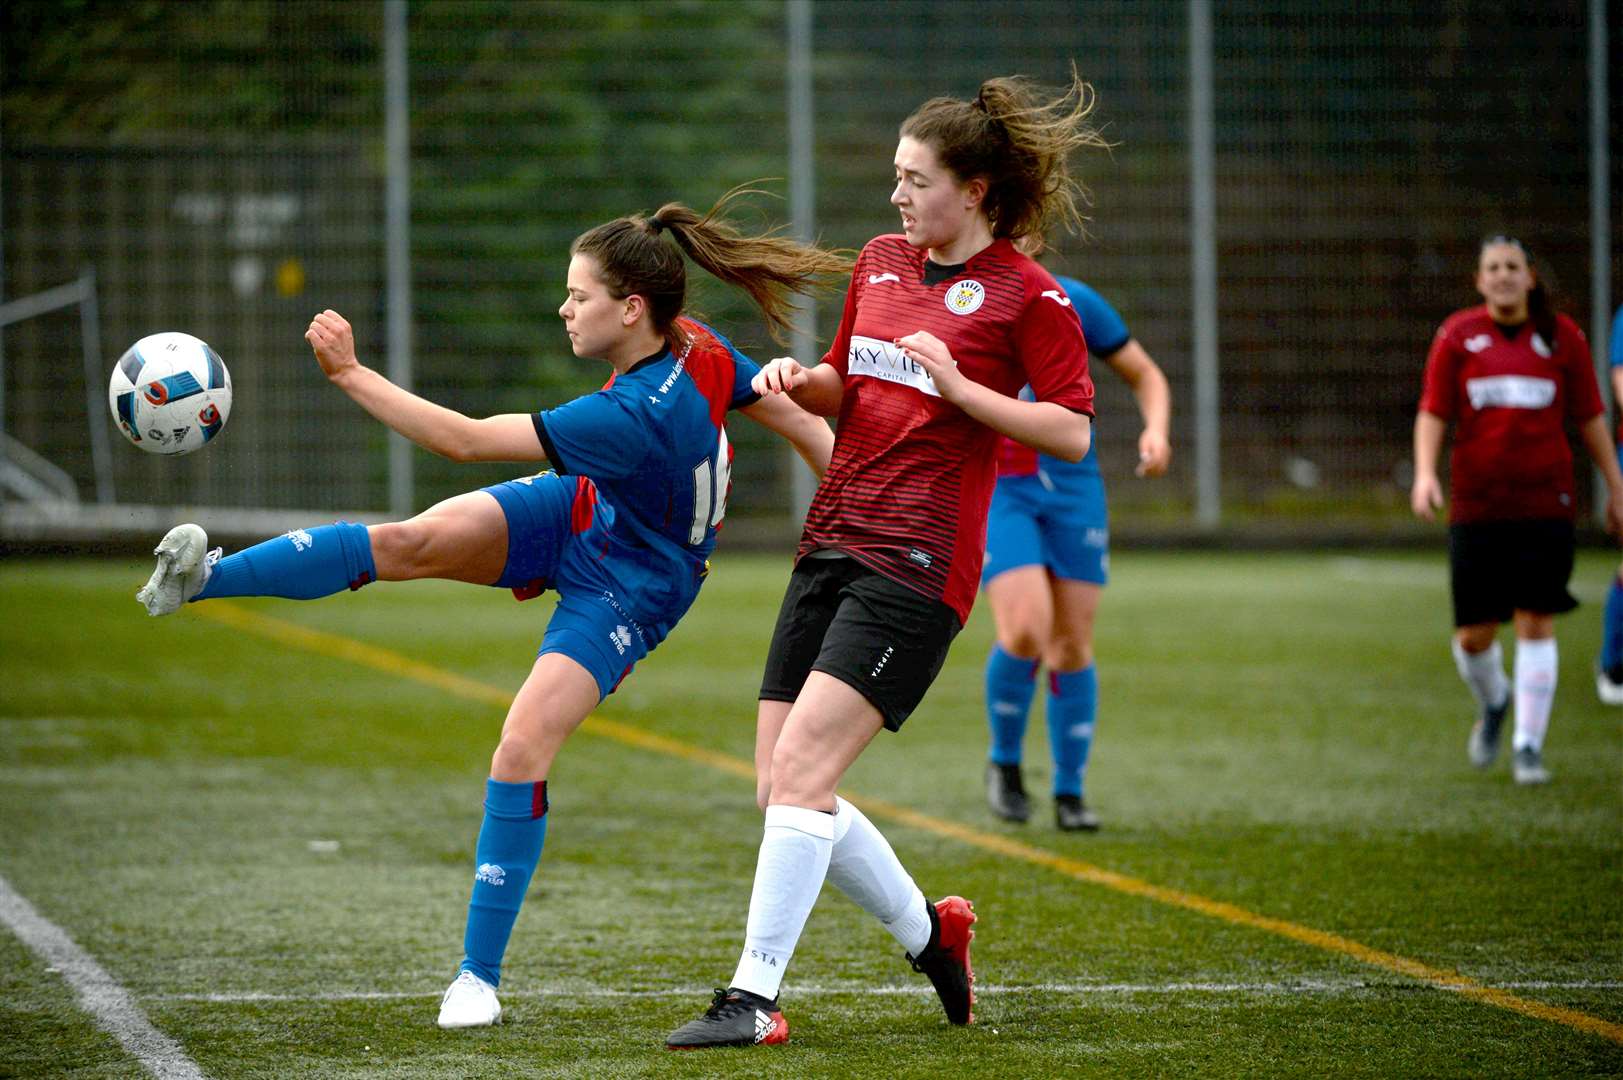 Inverness Caledonian Thistle Women v St Mirren Feb 2020..Jodie Malcolm keeping the ball in play..Picture: James MacKenzie..